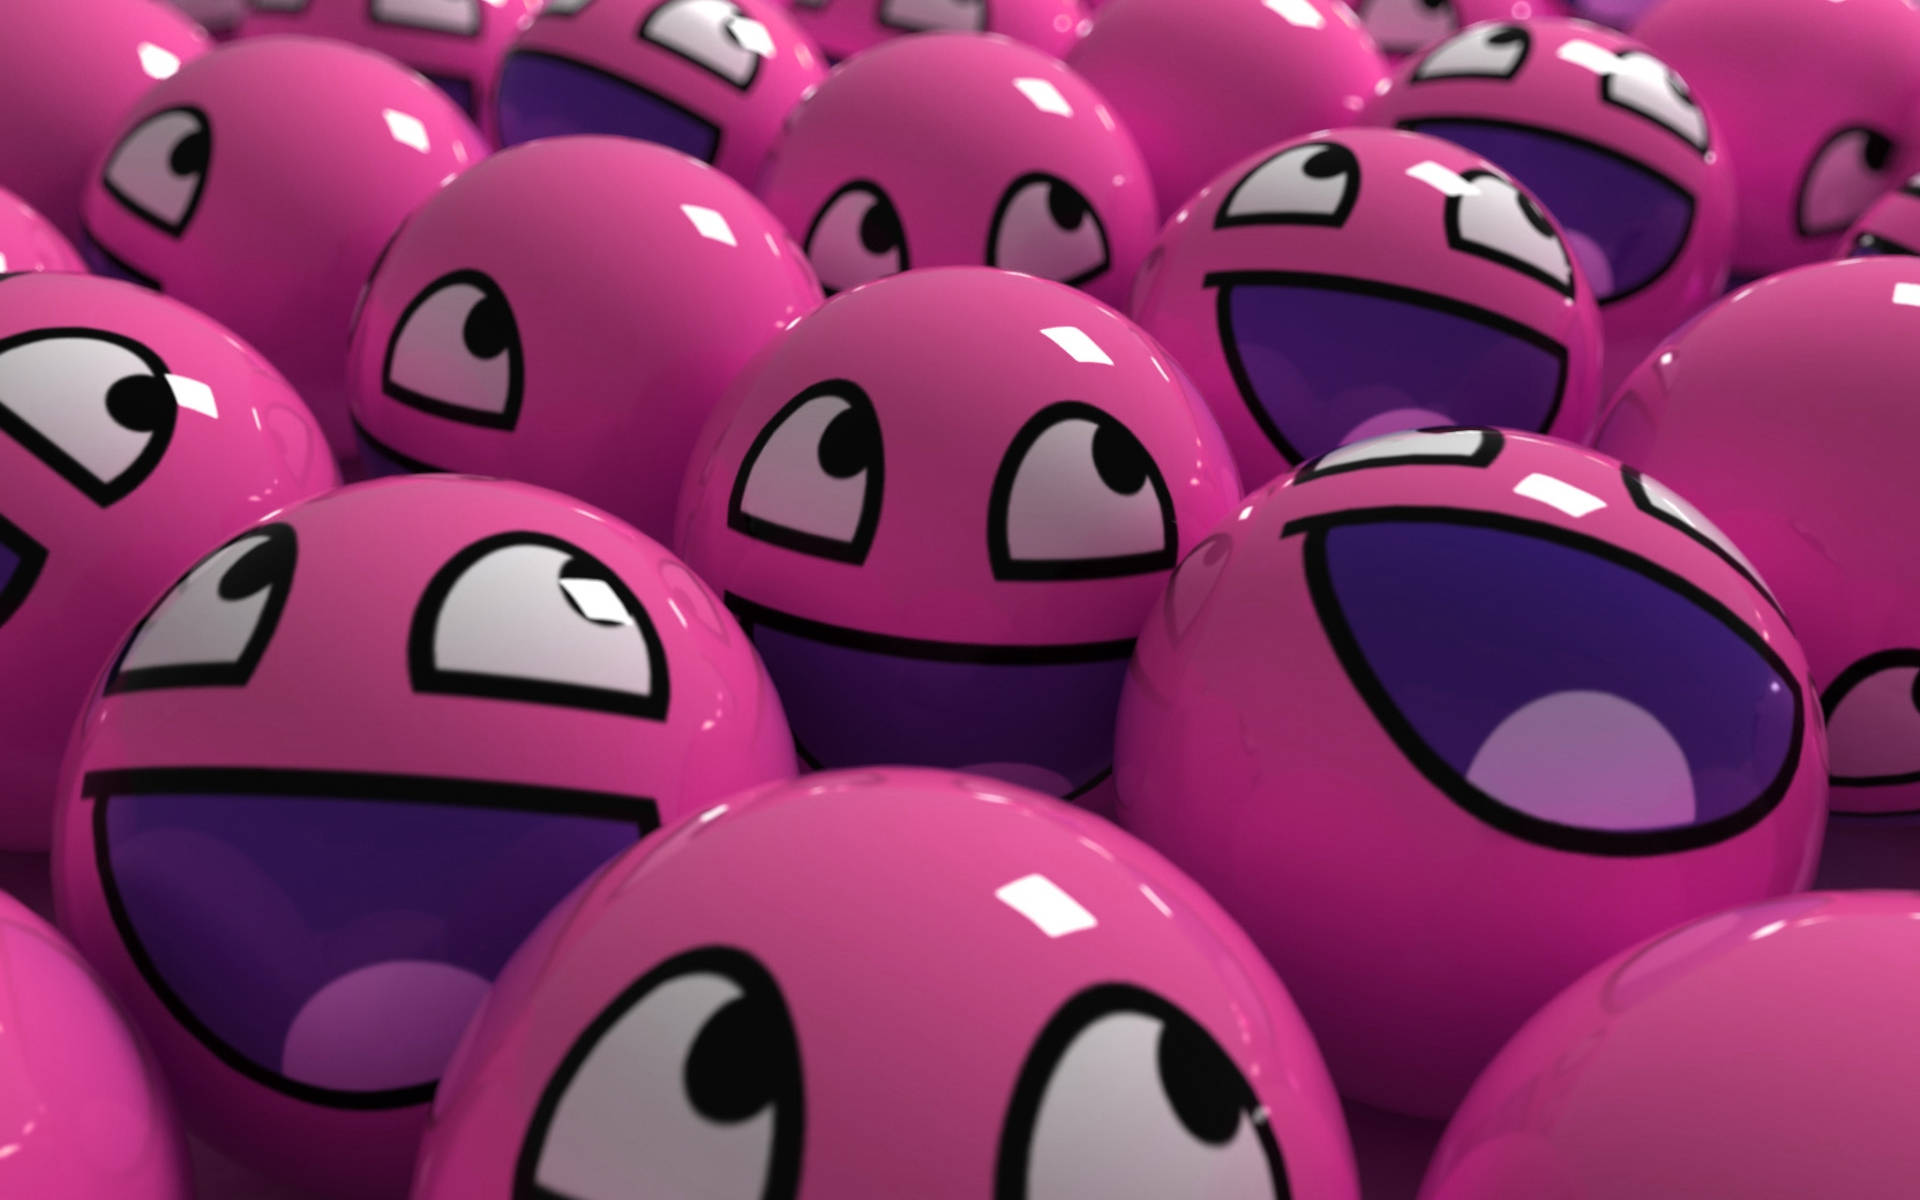 Download Cute And Pink Balls Smiling Faces Wallpaper 